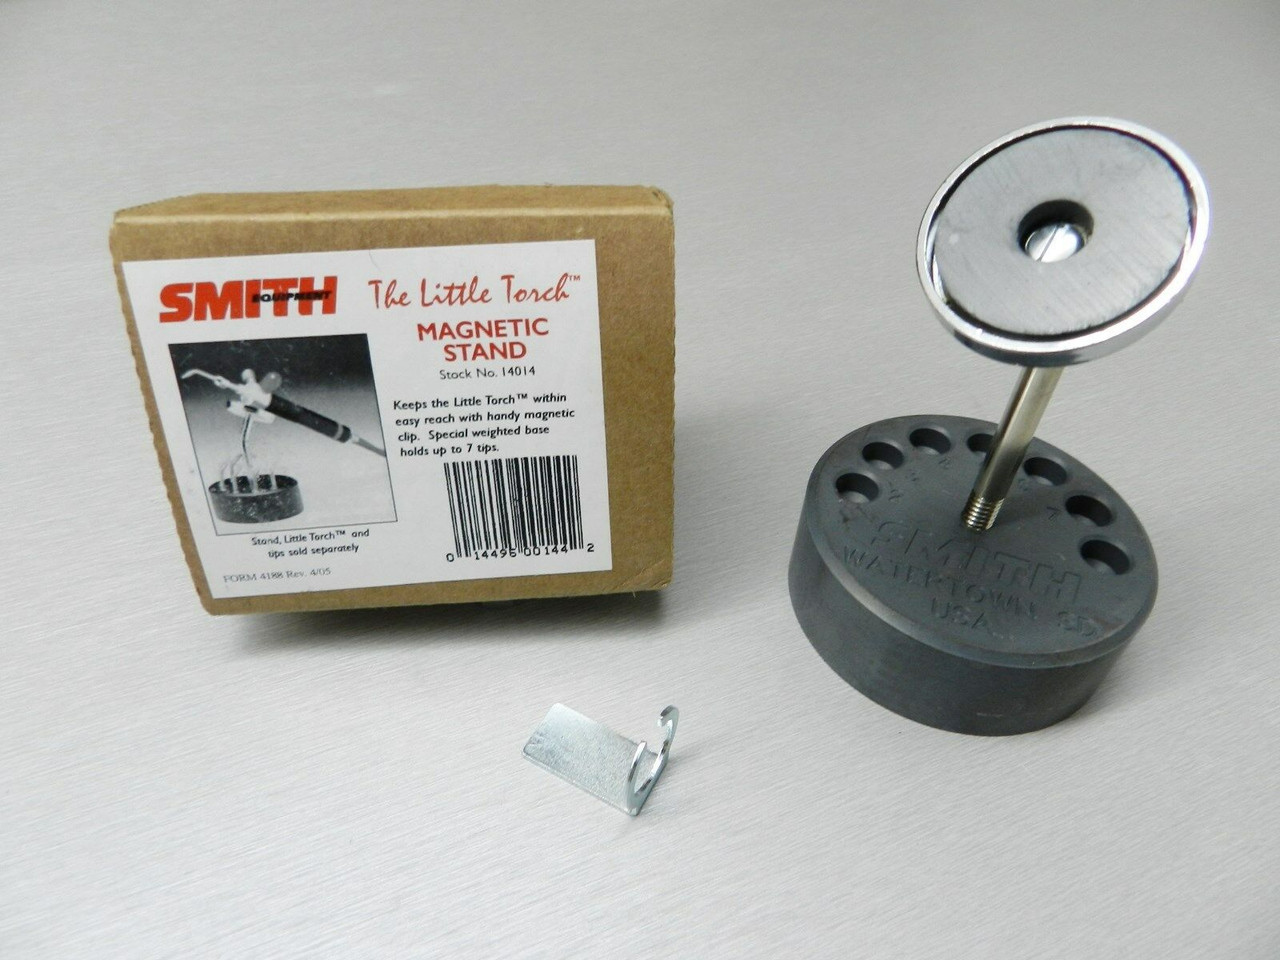 Smith Little Torch Magnetic Holder 14014 Torch Stand Steel Slotted Base for Tips